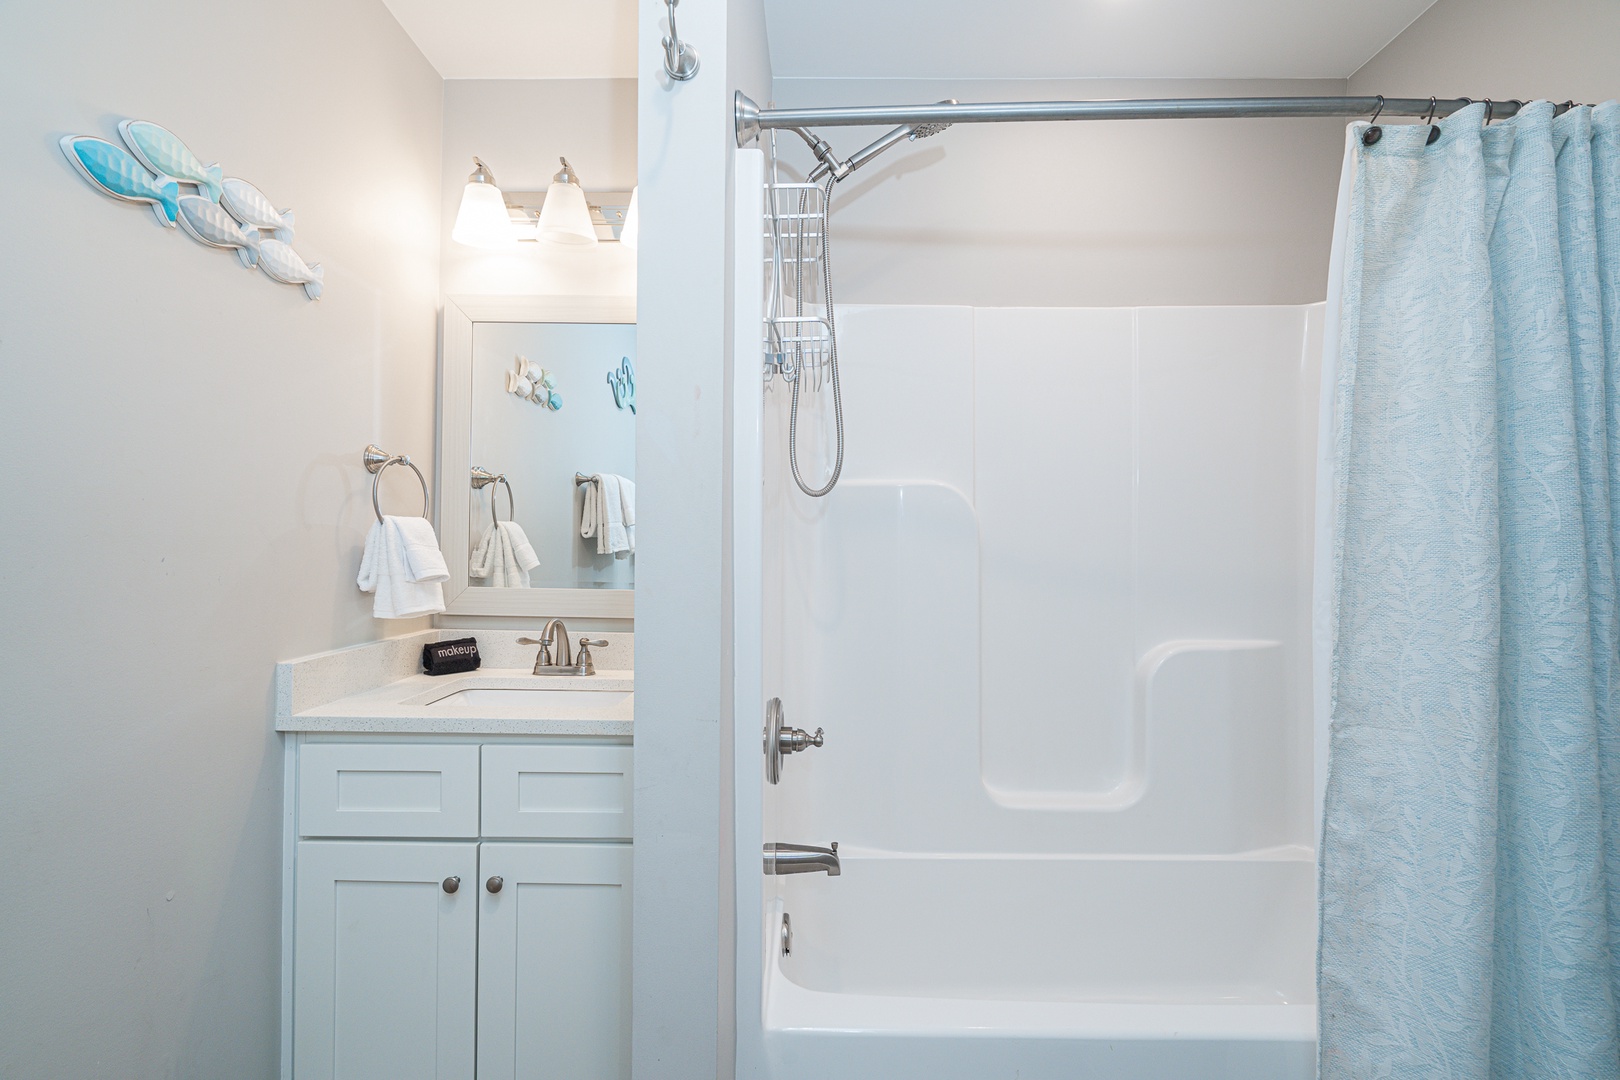 This shared full bathroom offers a single vanity & shower/tub combo